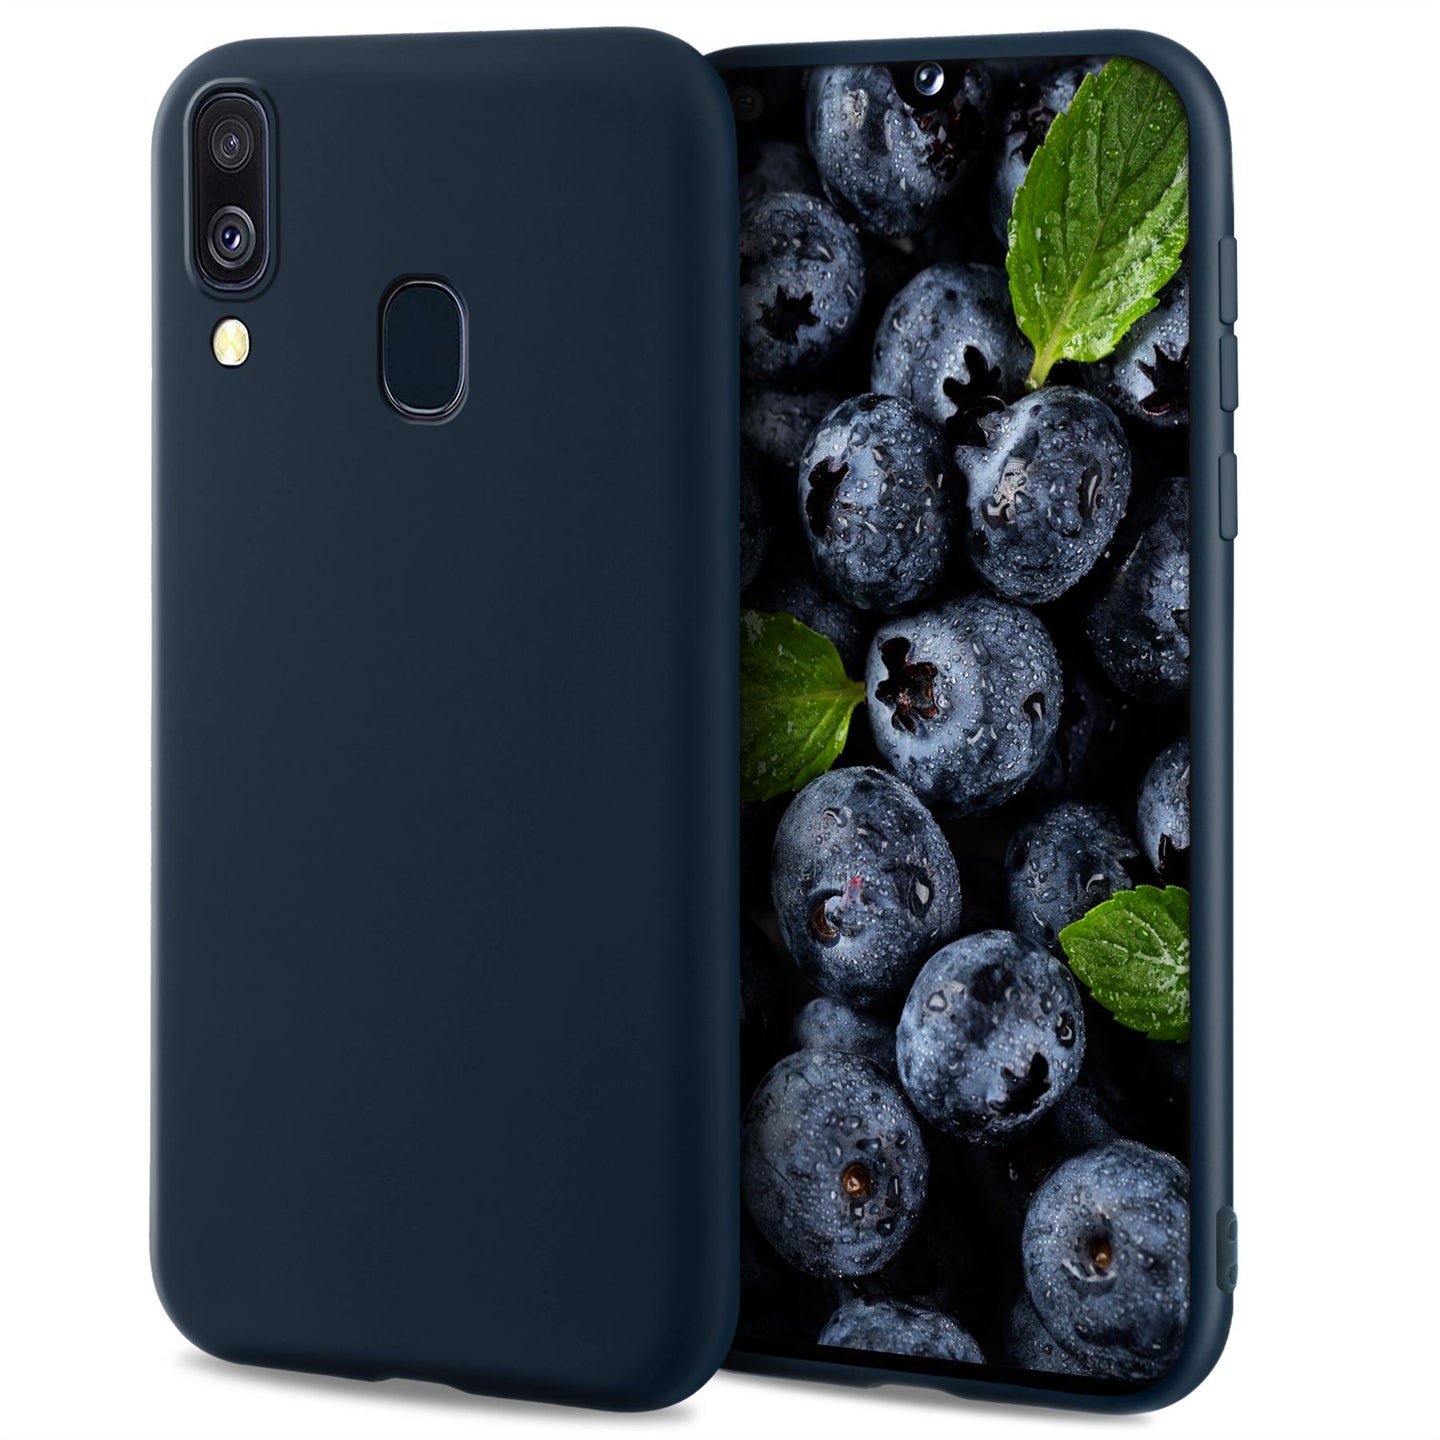 Moozy Lifestyle. Designed for Samsung A40 Case, Midnight Blue - Liquid Silicone Cover with Matte Finish and Soft Microfiber Lining